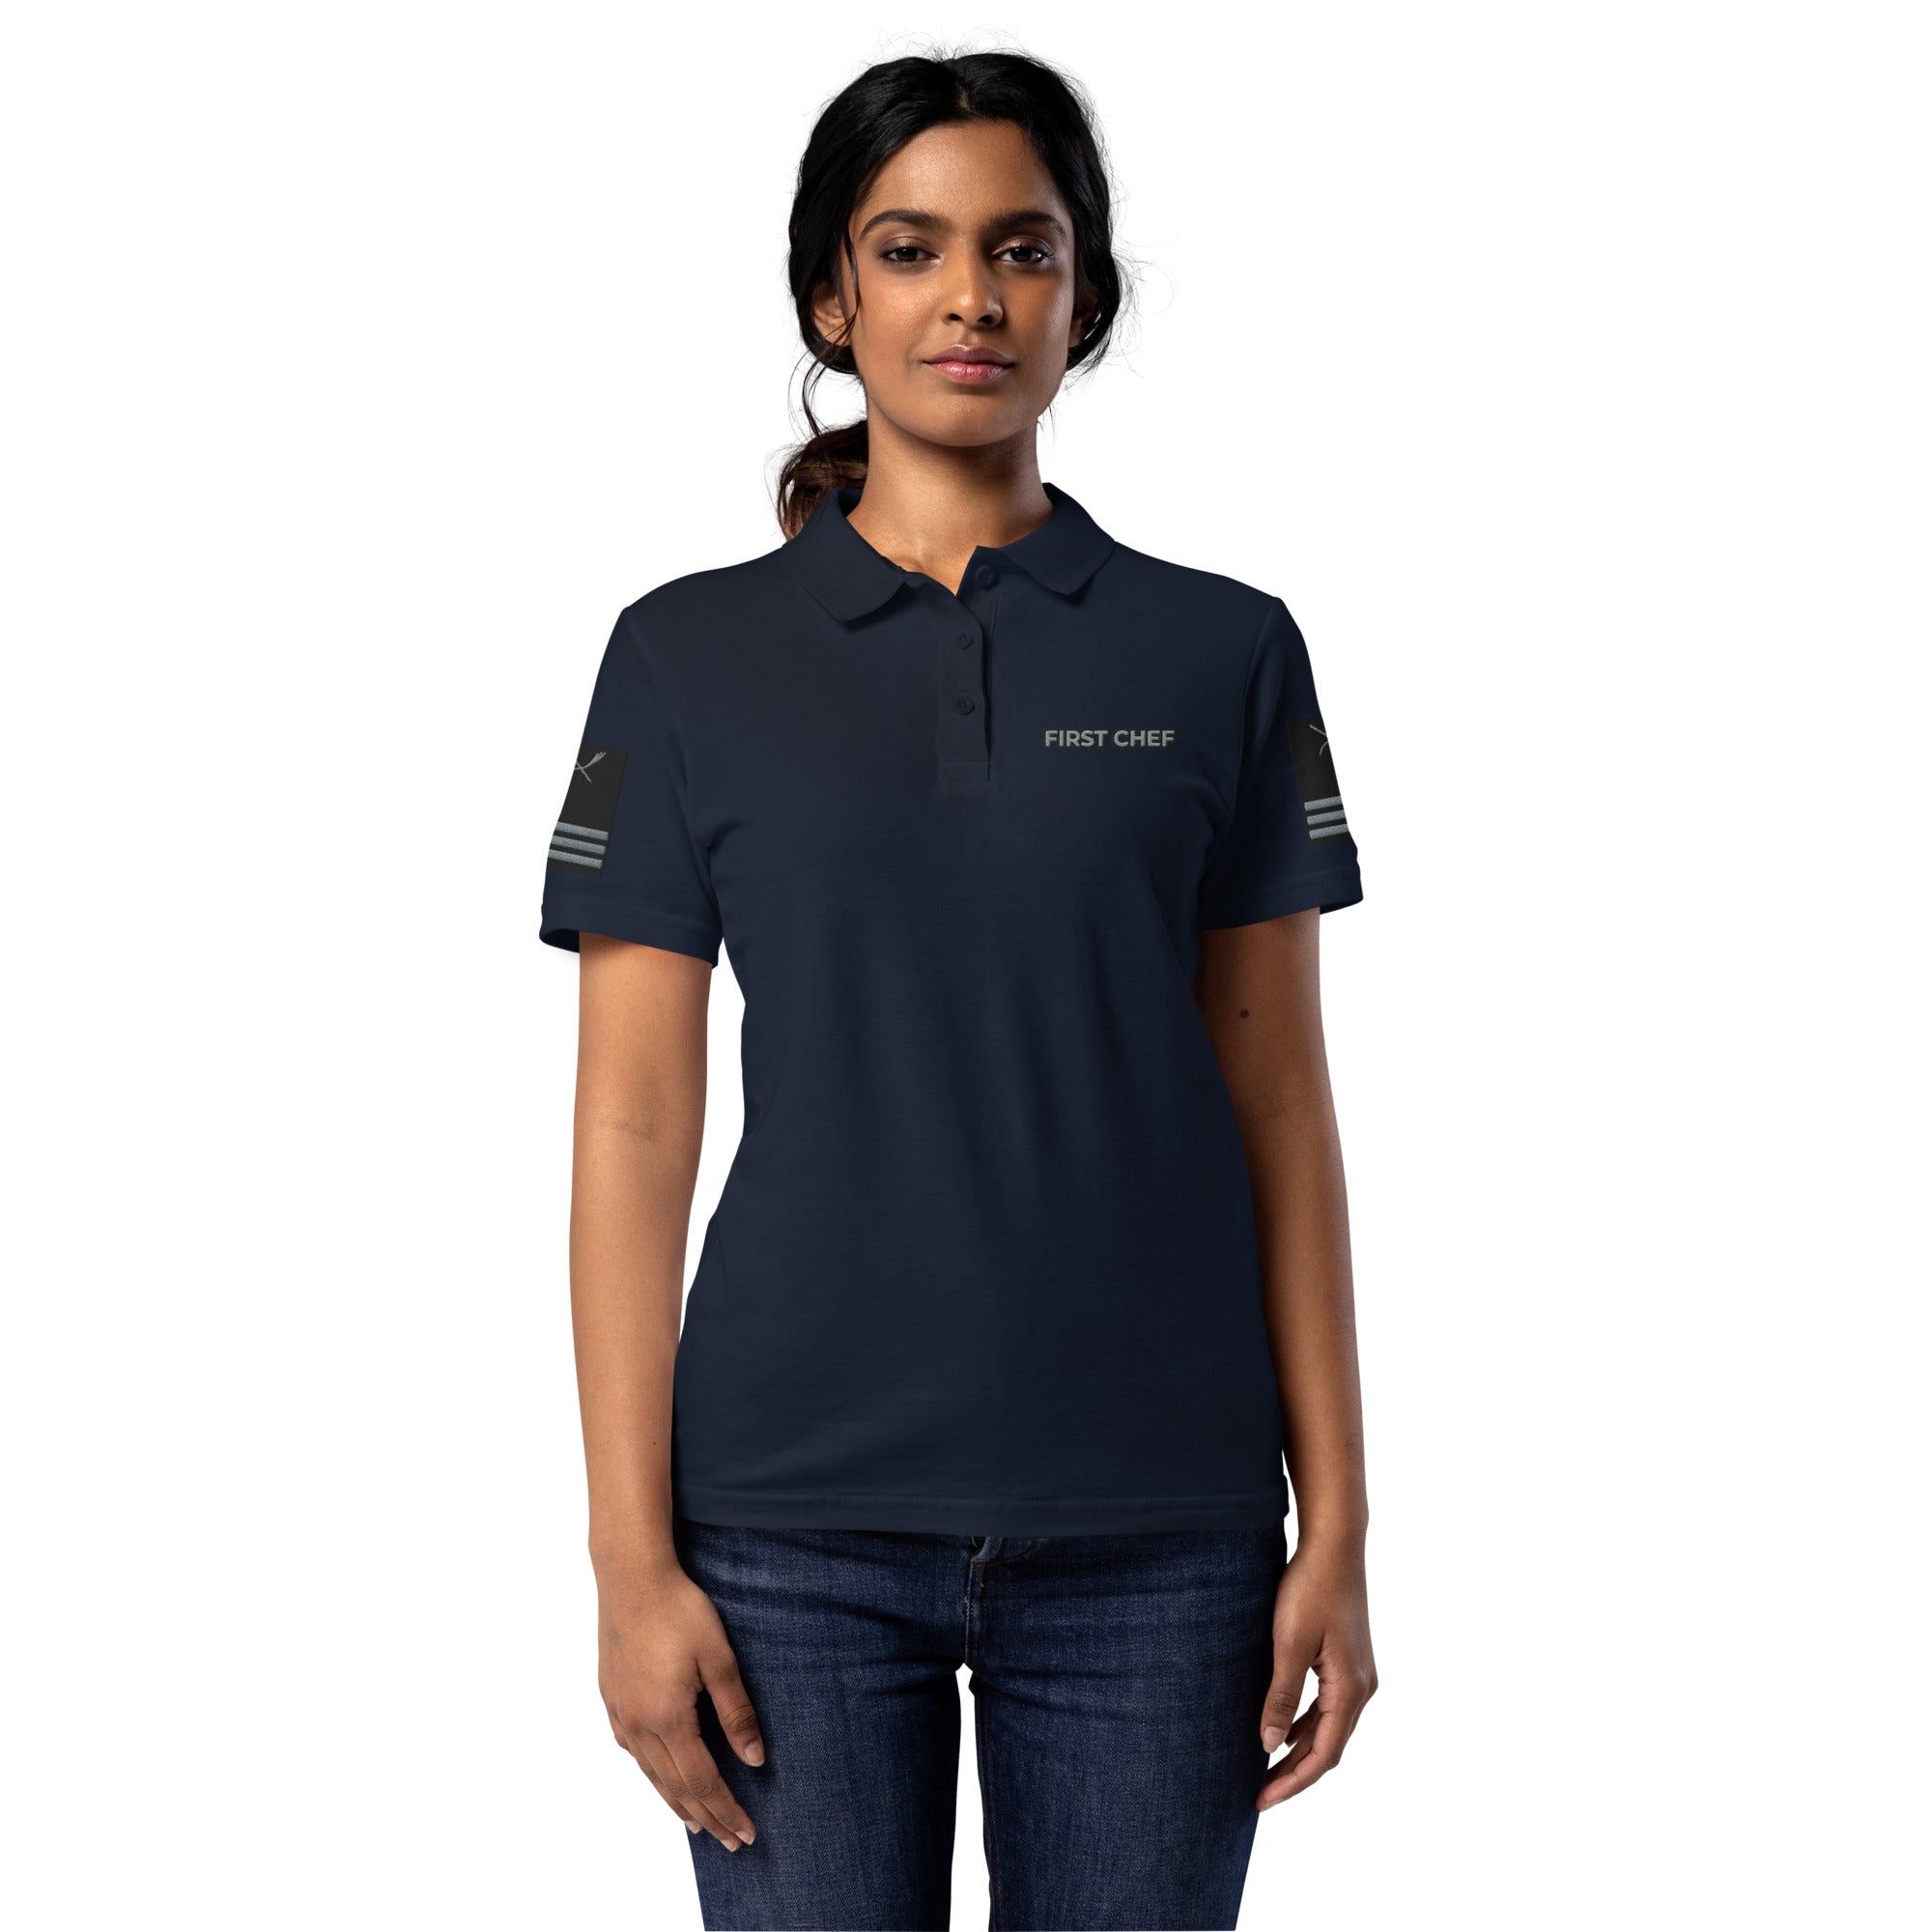 Super Yacht First Chef polo shirt